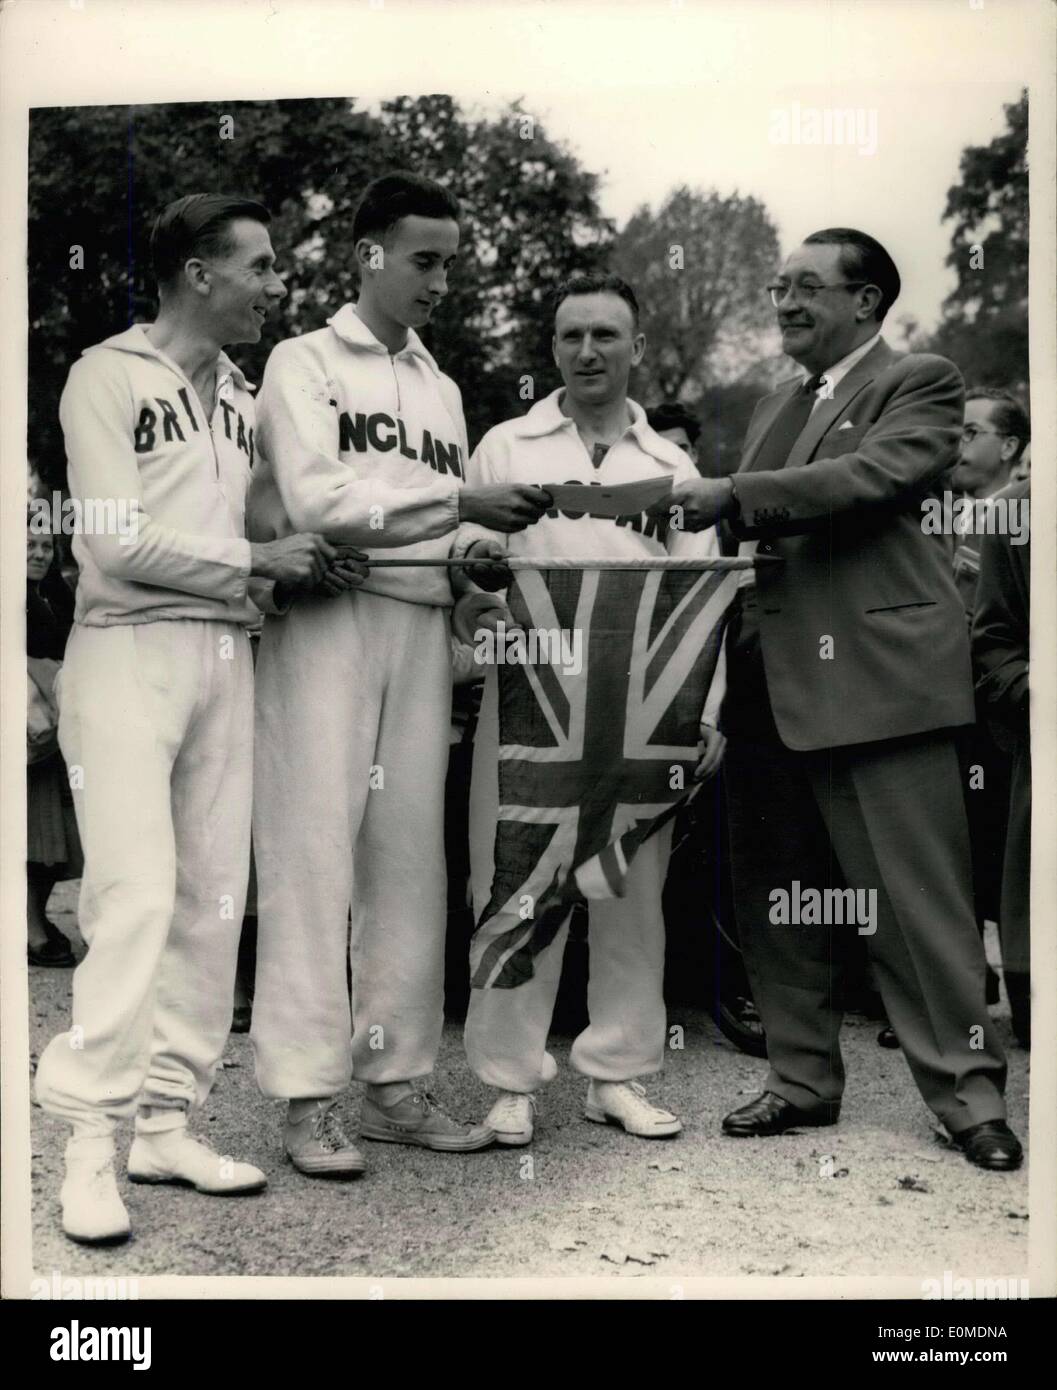 Oct. 15, 1954 - Famous Athletes Start Off In London To Newcastle Relay Run. In Aid Of Infantile Paralysis Fellowship: Many world famous athletes are taking part in the London to Newcastle 300 mile relay run - in aid of the Infantile Paralysis Fellowship. It is all part of the King's College, Newcastle Rag Week. Students and athletes will cover the 300 miles in four daily ten mile relays- taking nine days in all. When not running the athletes will travel in an ancient taxi-cab which also contains collecting boxes. It is hoped that 5 per mile. Photo shows Stage and T.V Stock Photo